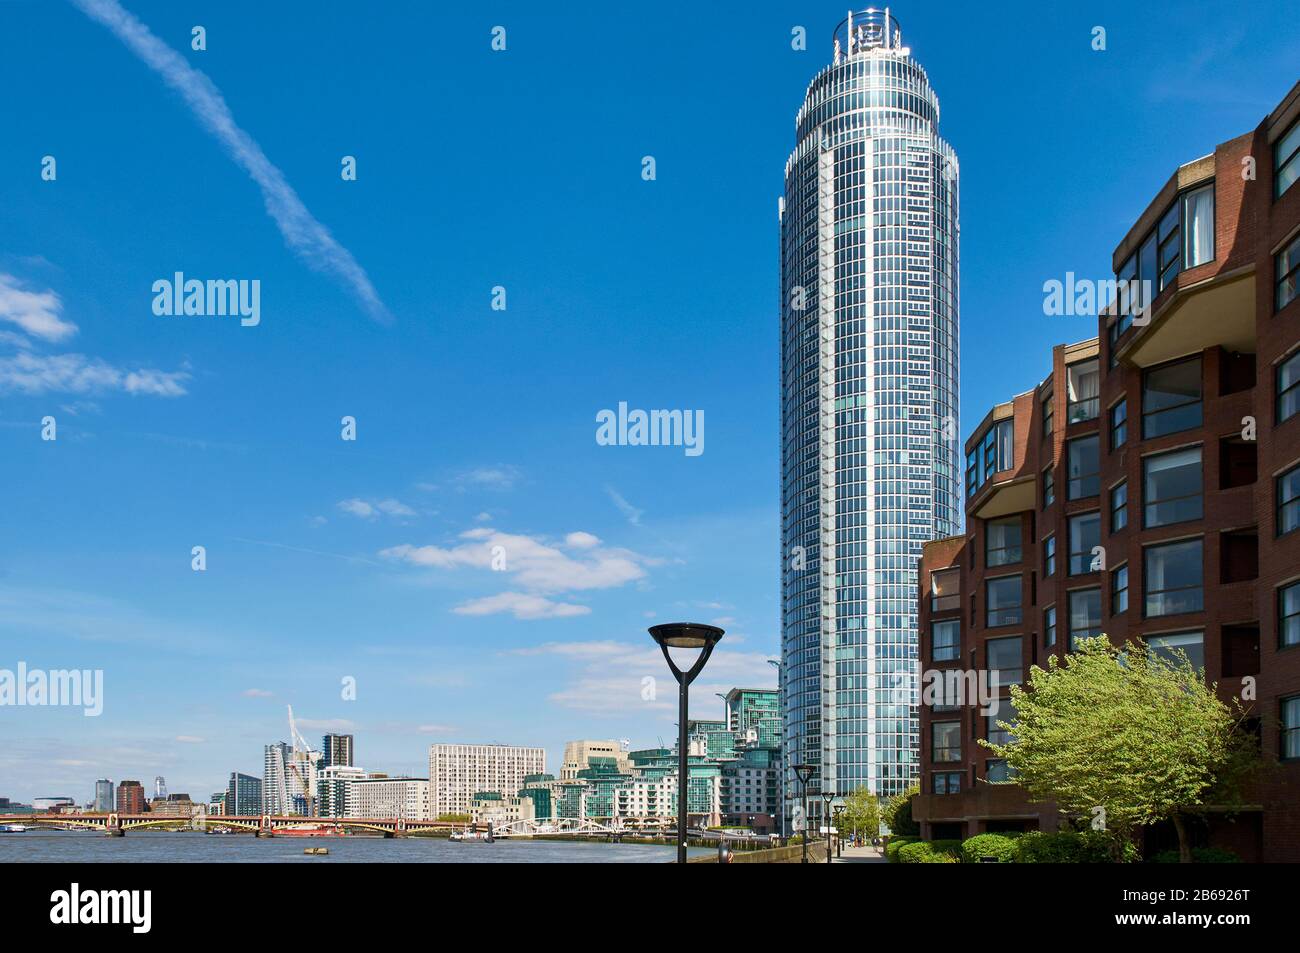 St George's Wharf Tower on the South Bank of the River Thames, London UK, with Vauxhall Bridge in the background Stock Photo